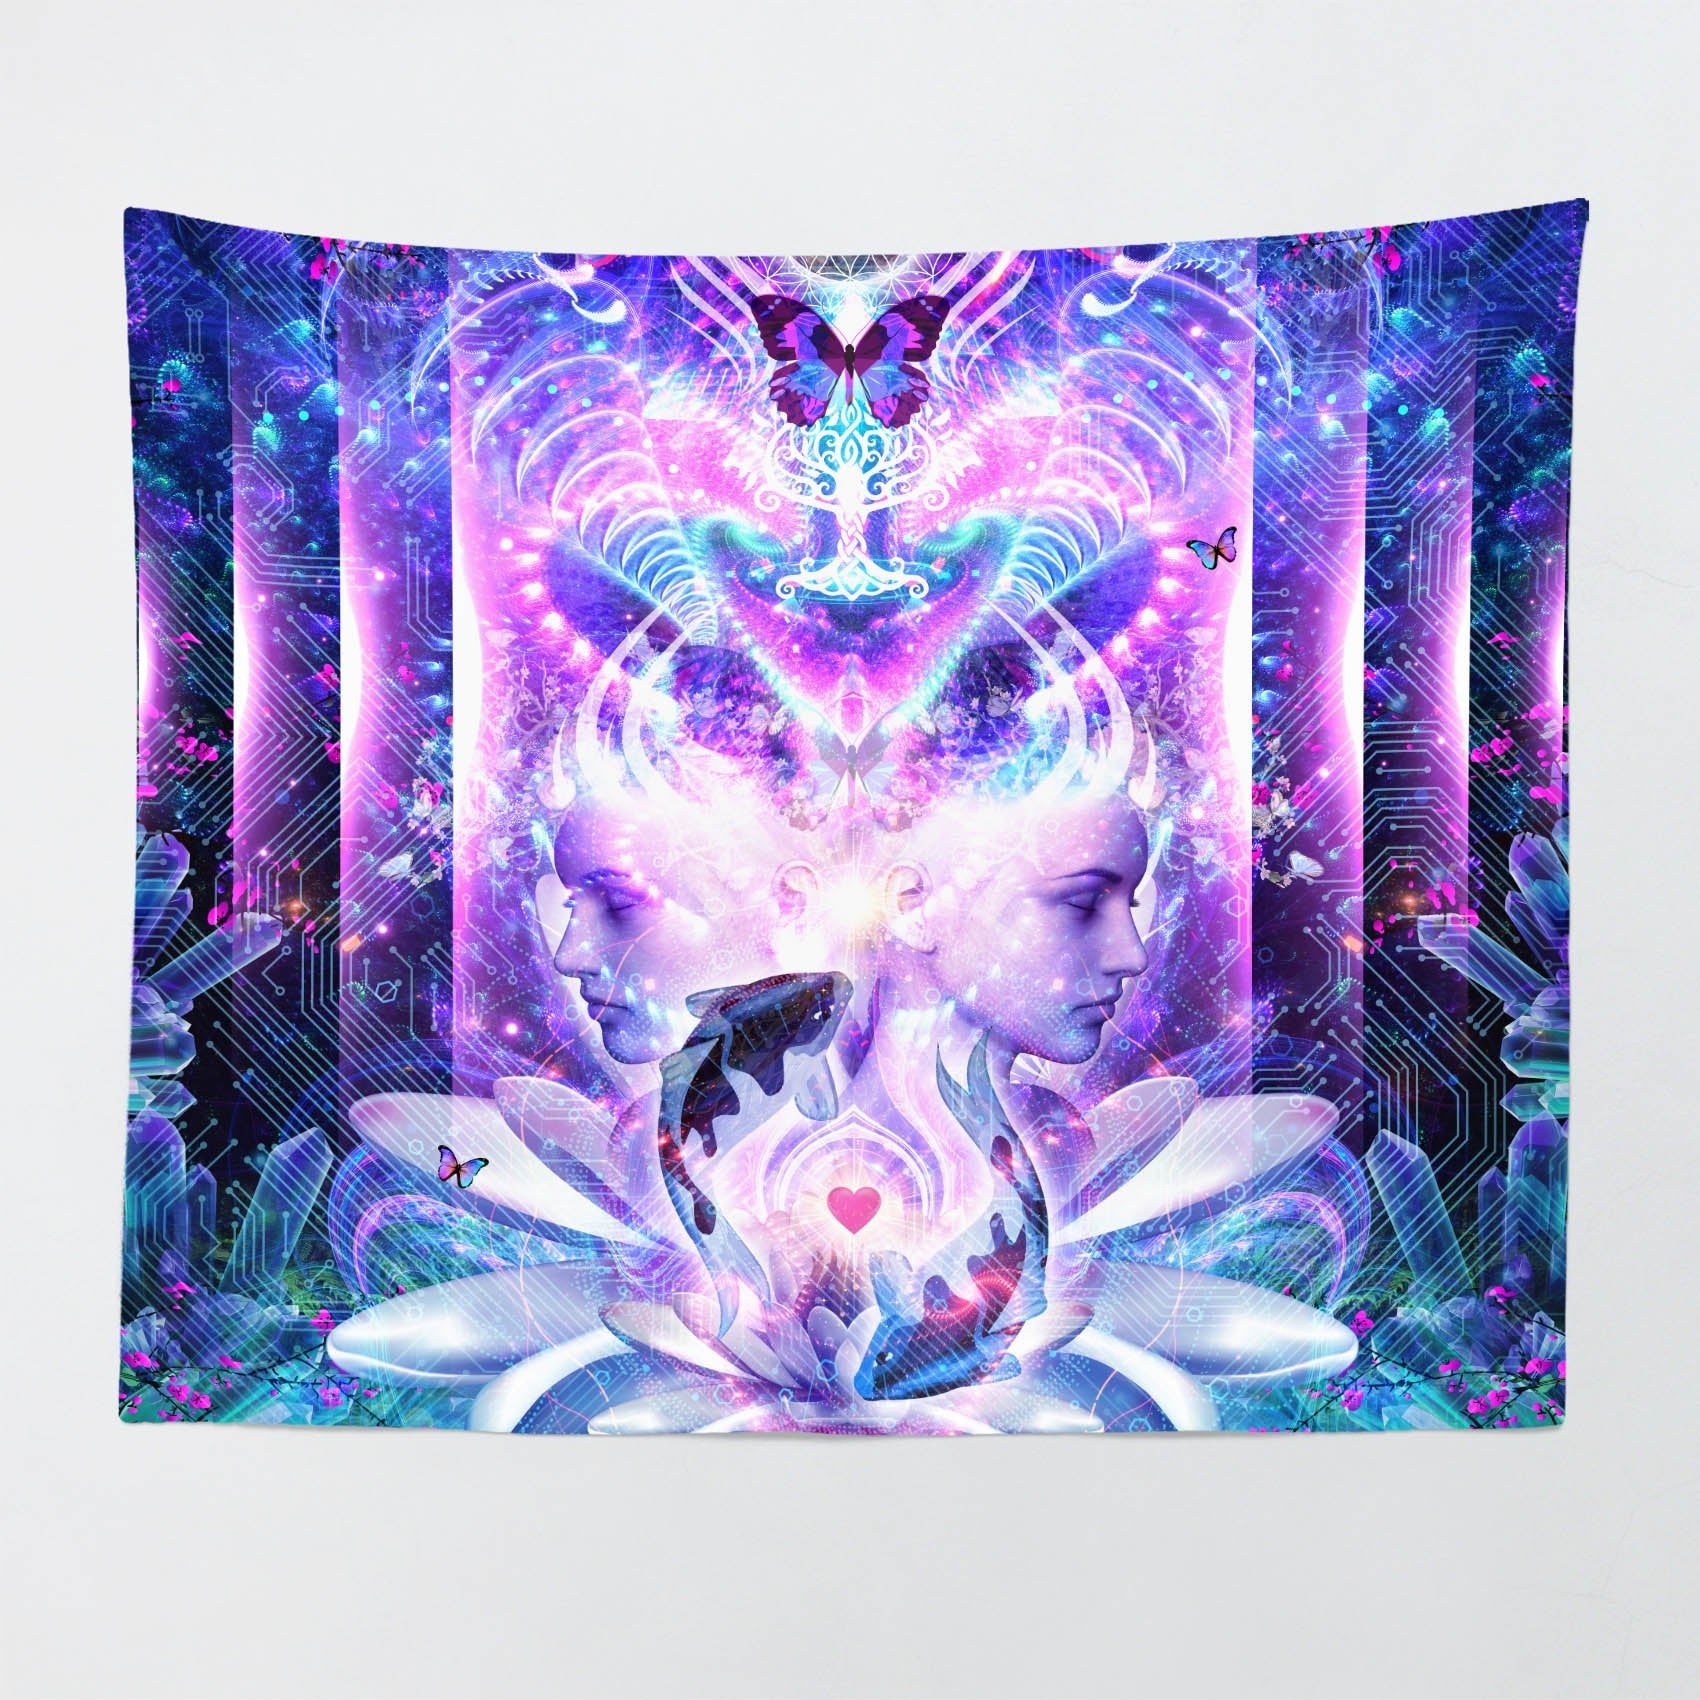 Quest For Mindfulness - Visionary Tapestries